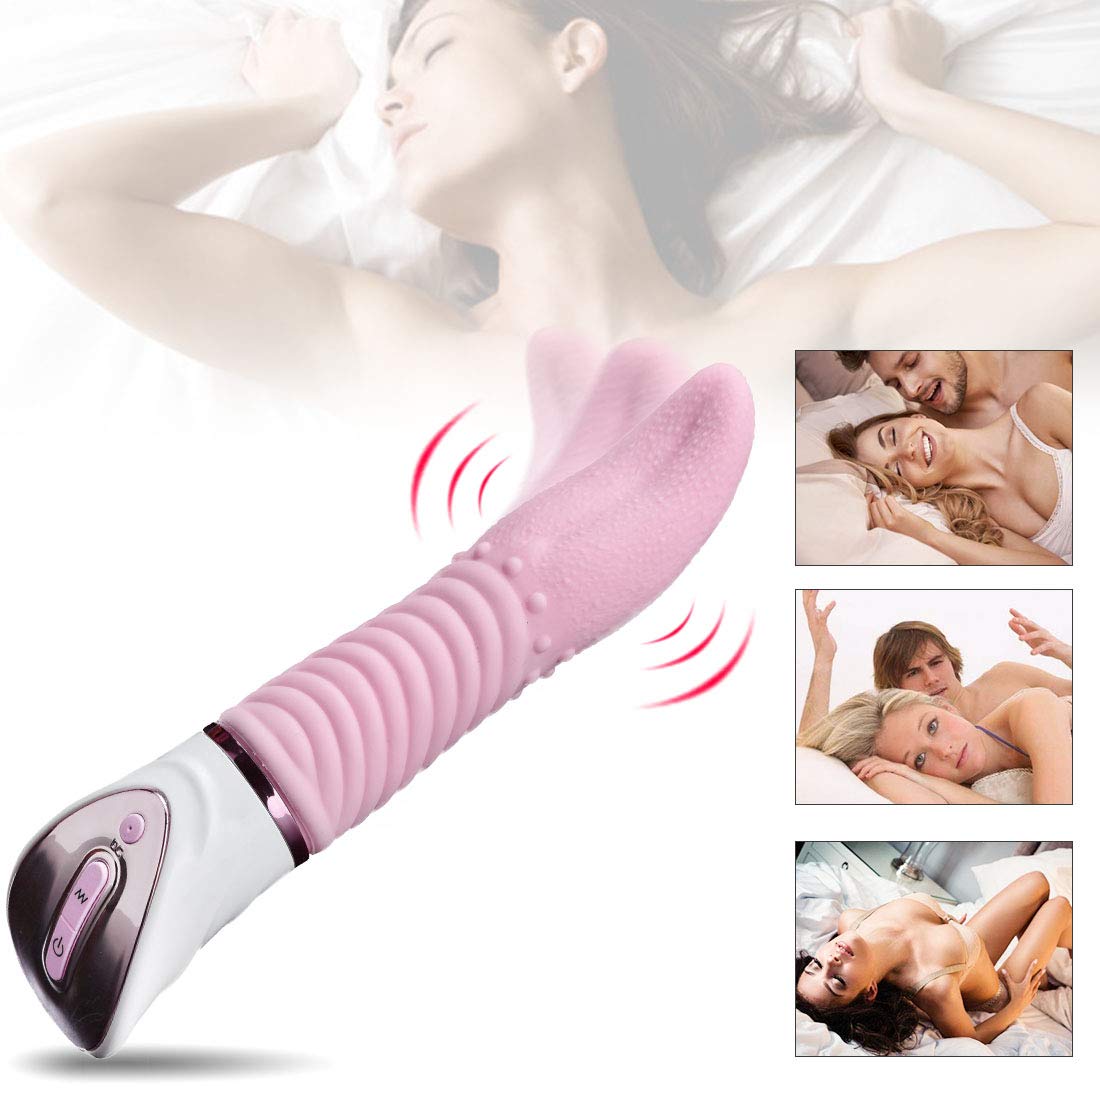 10 Speed Tongue Oral Sex G Spot Vibrating Massager G-bliss O-maker Toy